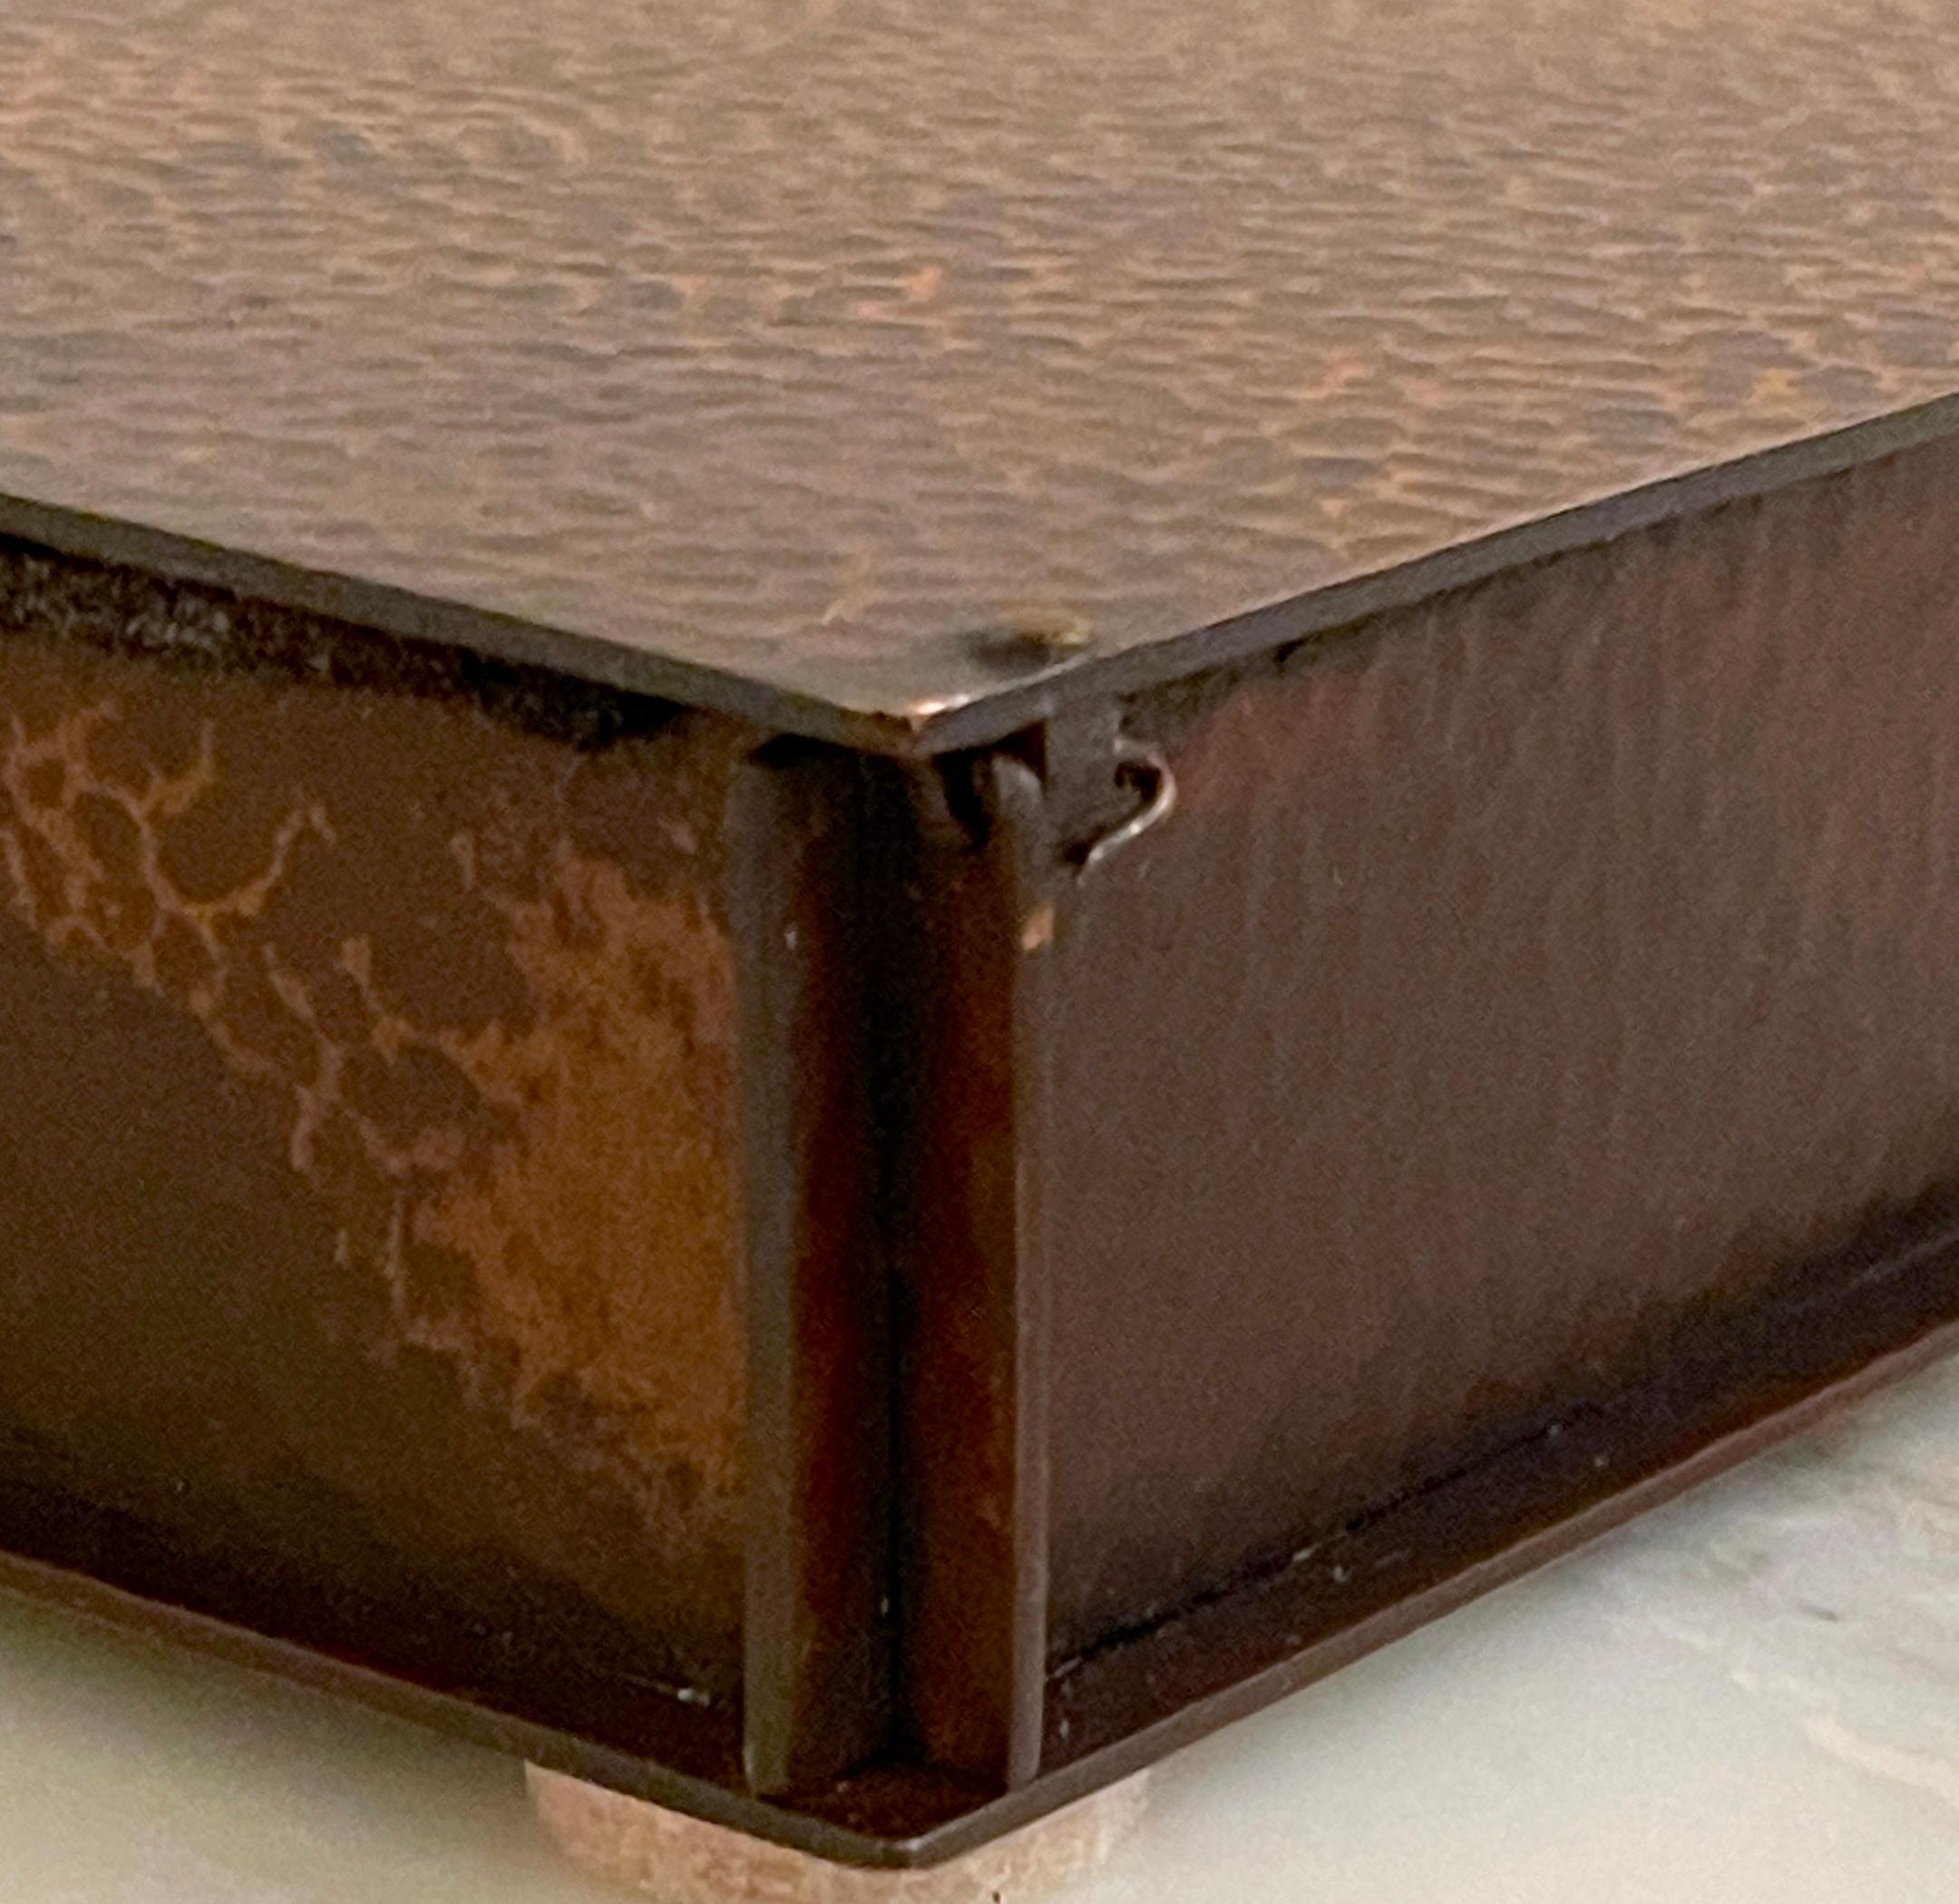 Roycroft Arts & Crafts Copper Table Box, from The Roycroft Inn at East Aurora NY In Good Condition For Sale In West Palm Beach, FL